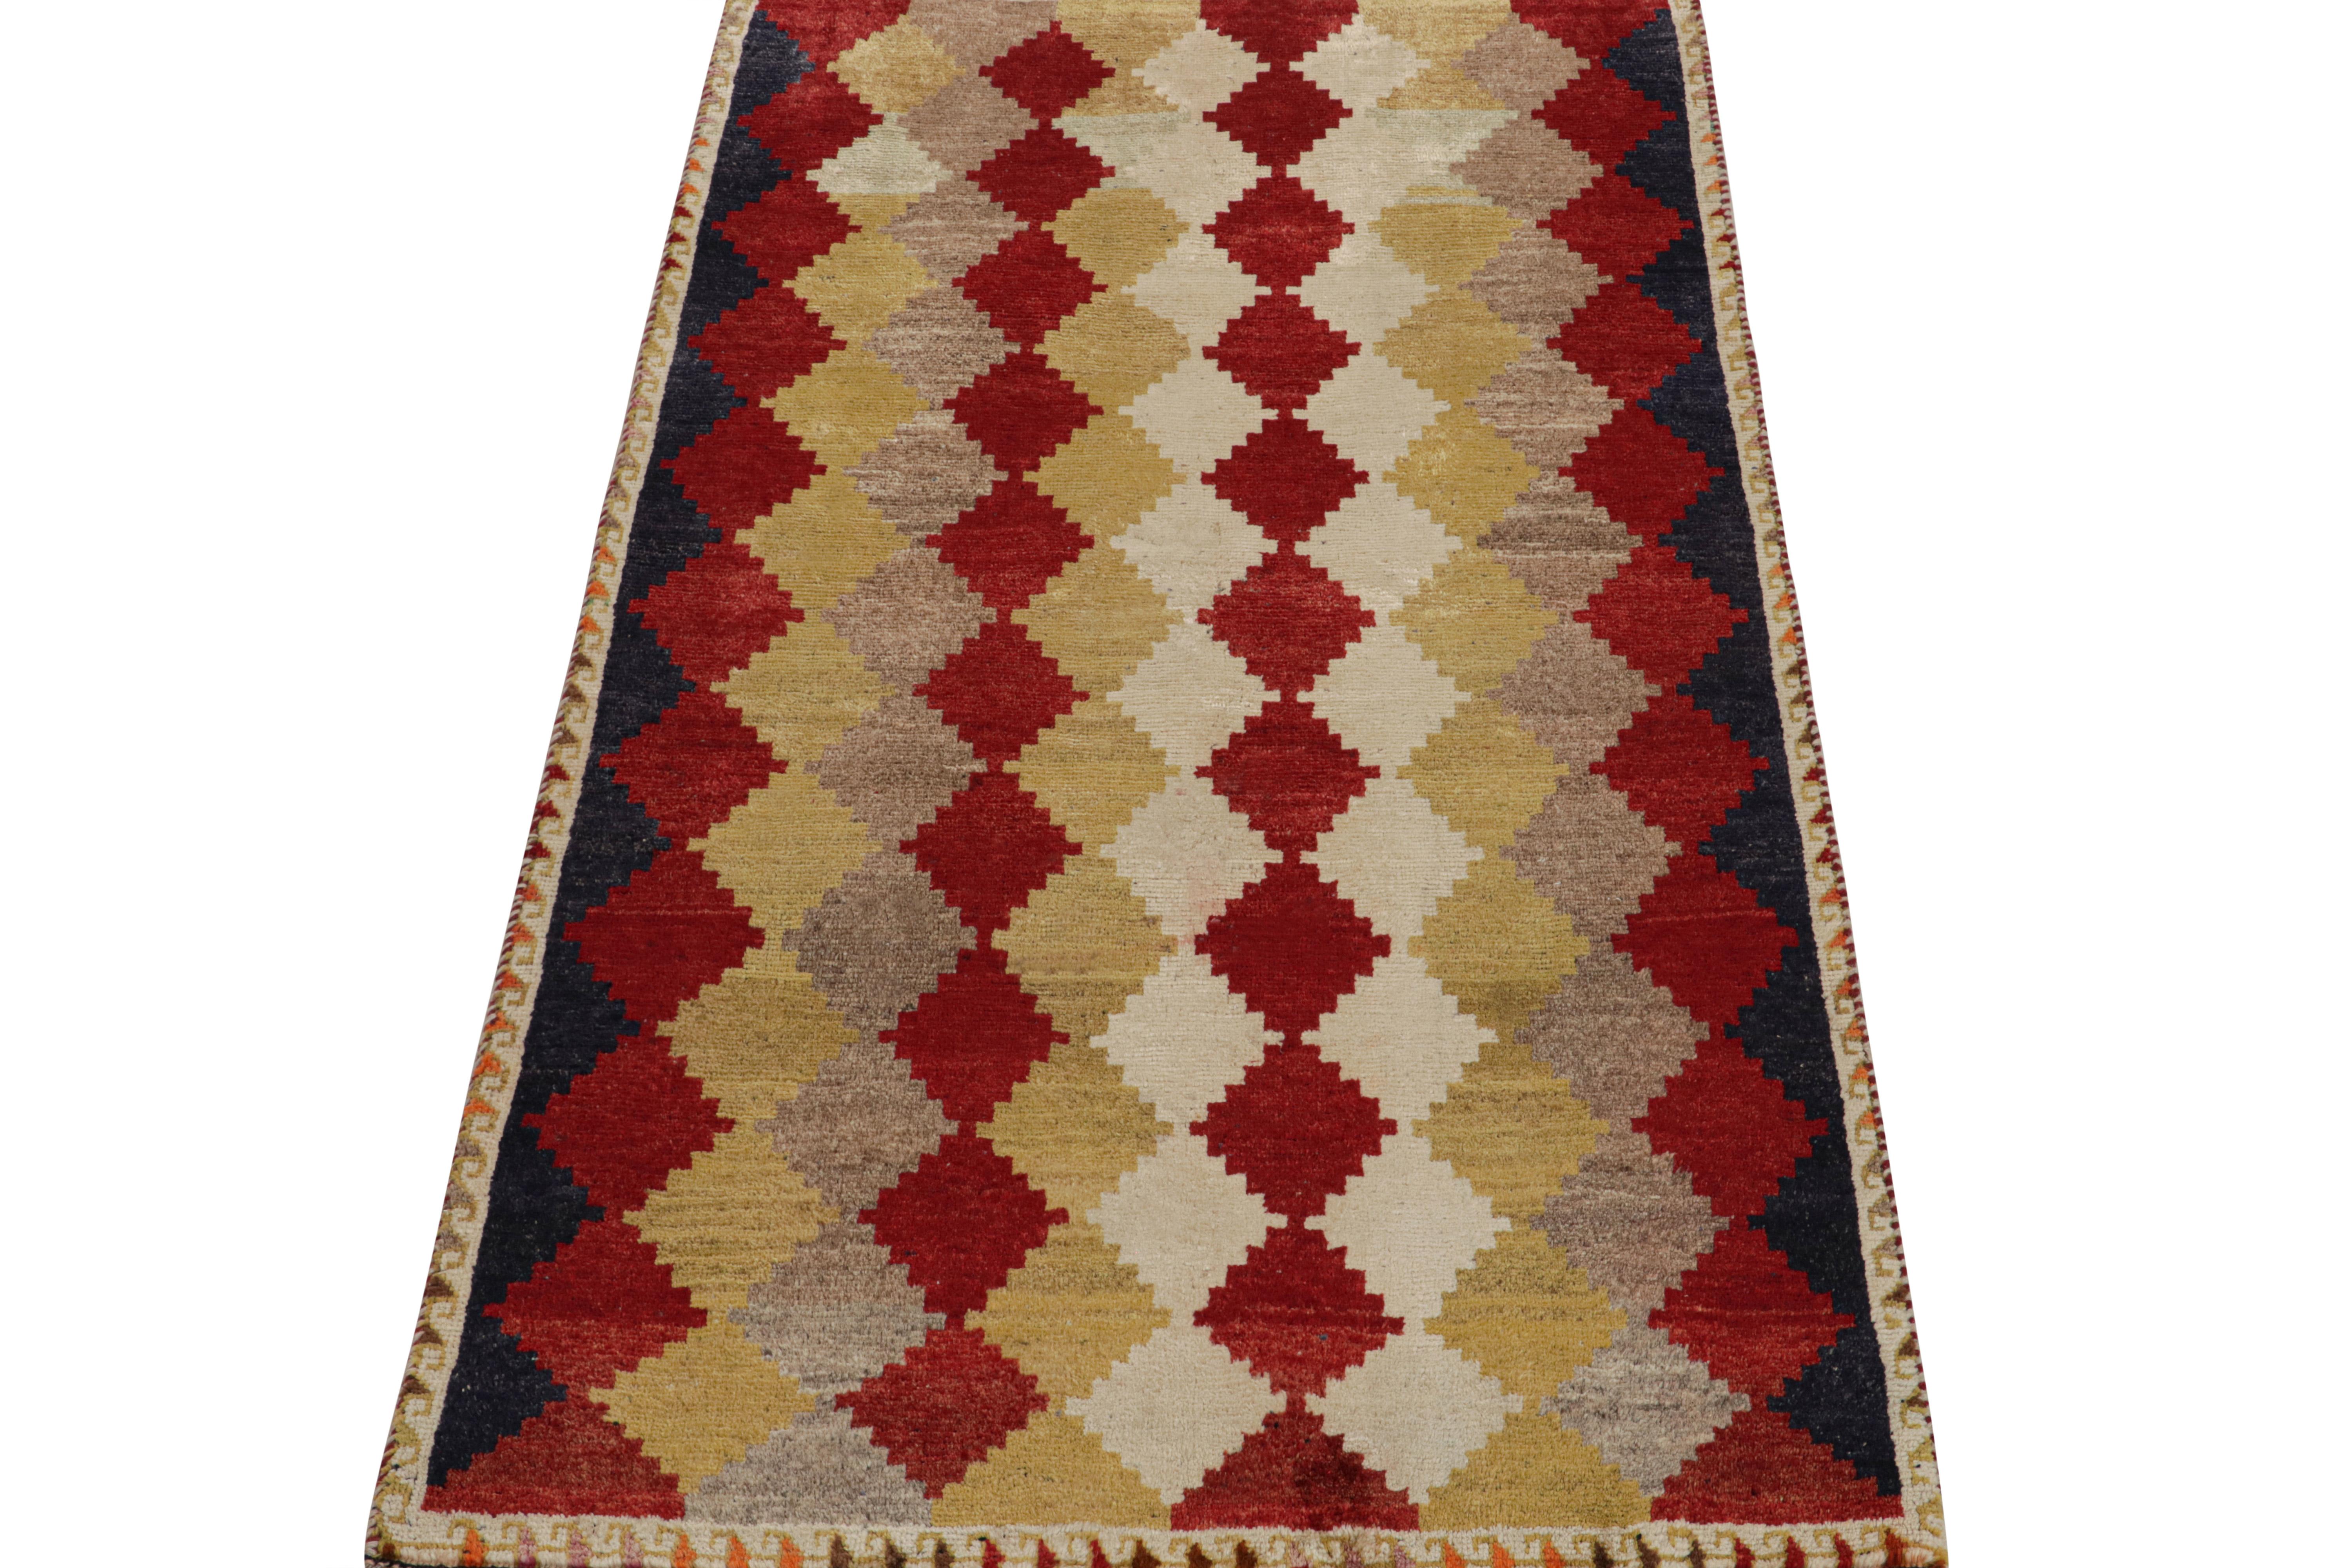 Turkish Vintage Gabbeh Tribal Runner in Red and Beige Diamond Patterns by Rug & Kilim For Sale